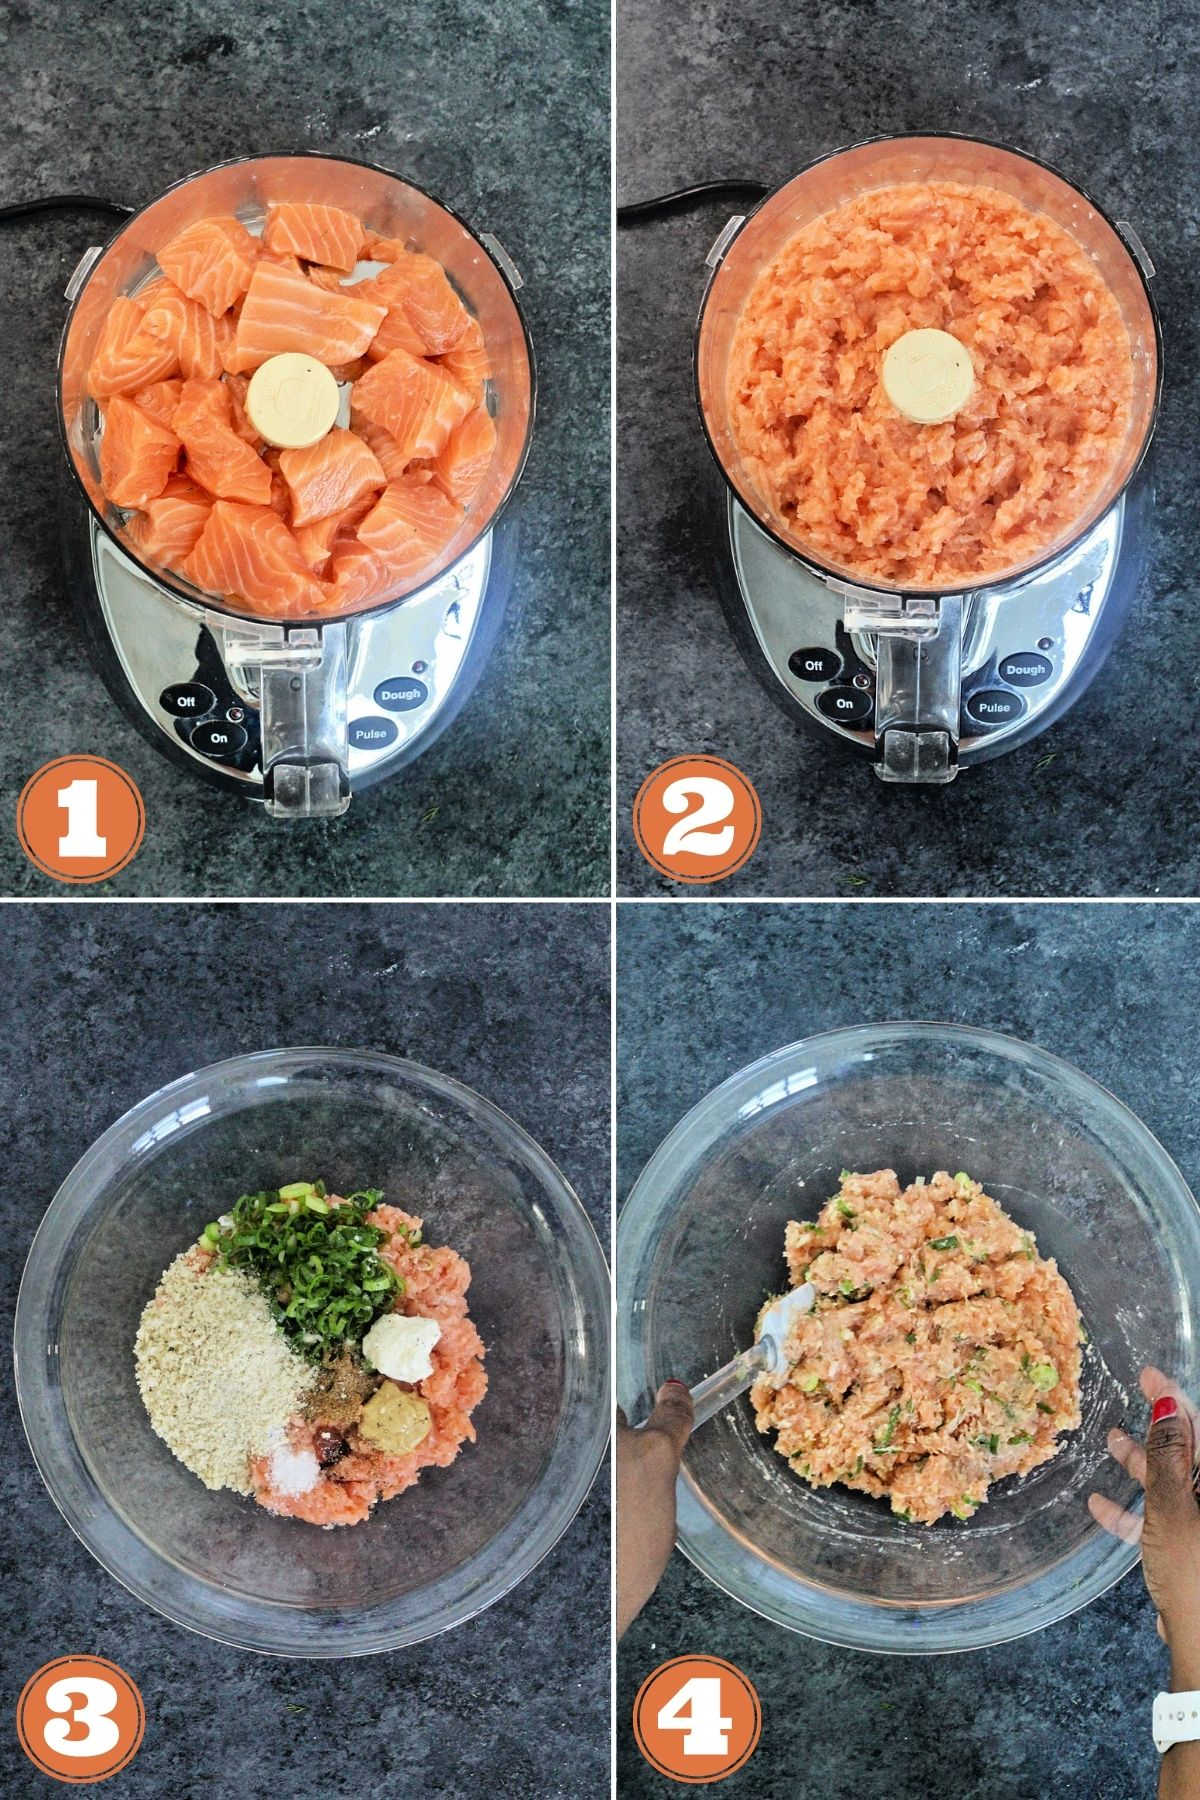 Collage of steps 1-4 for making grilled salmon burgers.